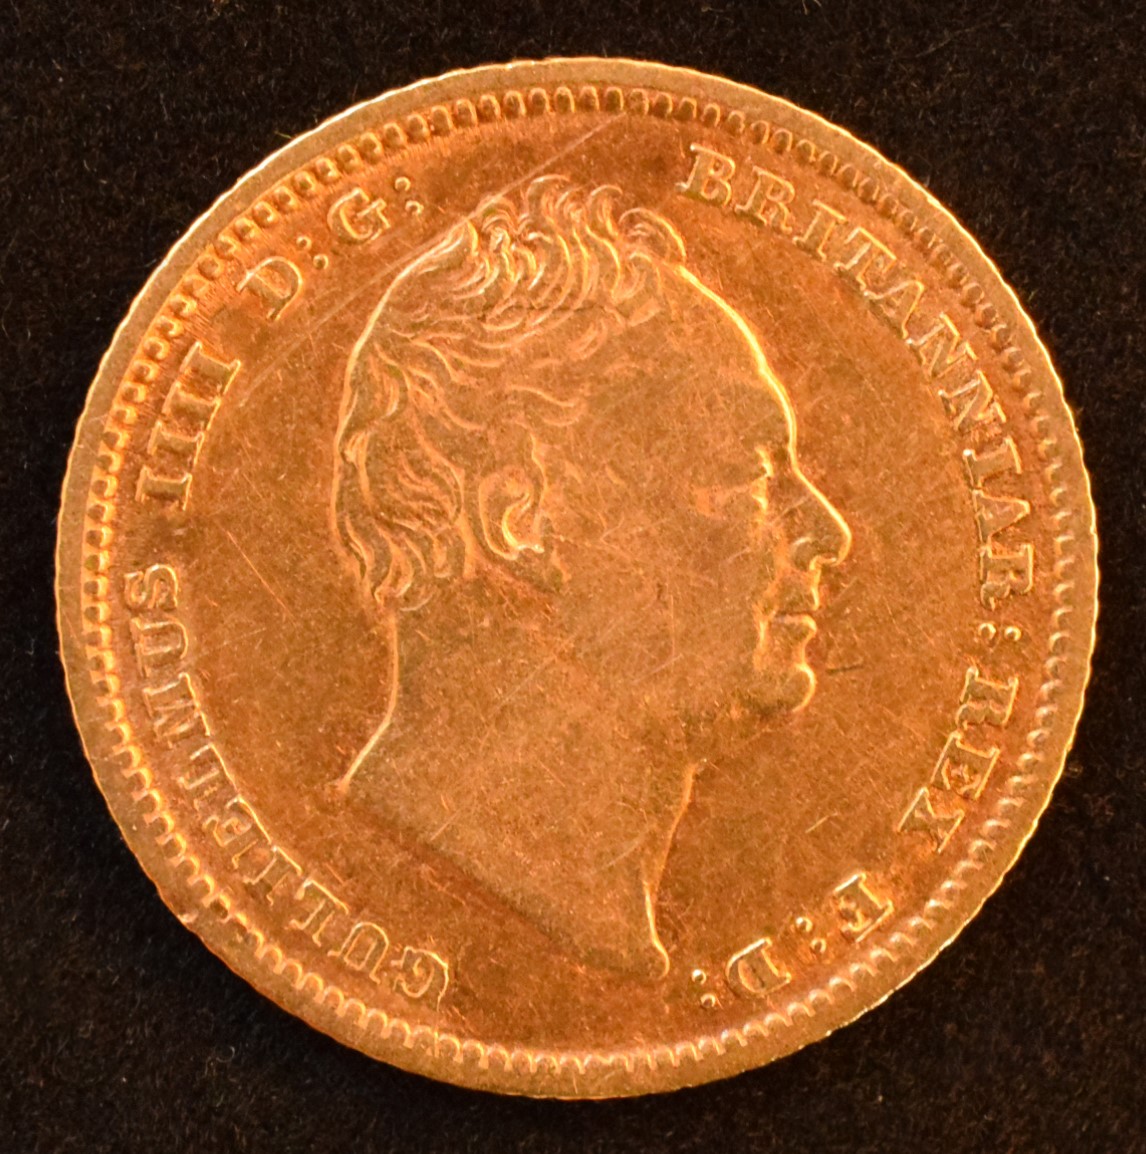 King William IV, Large-size Half-Sovereign, 1835, large size (19.4mm), bare head r. R. crowned